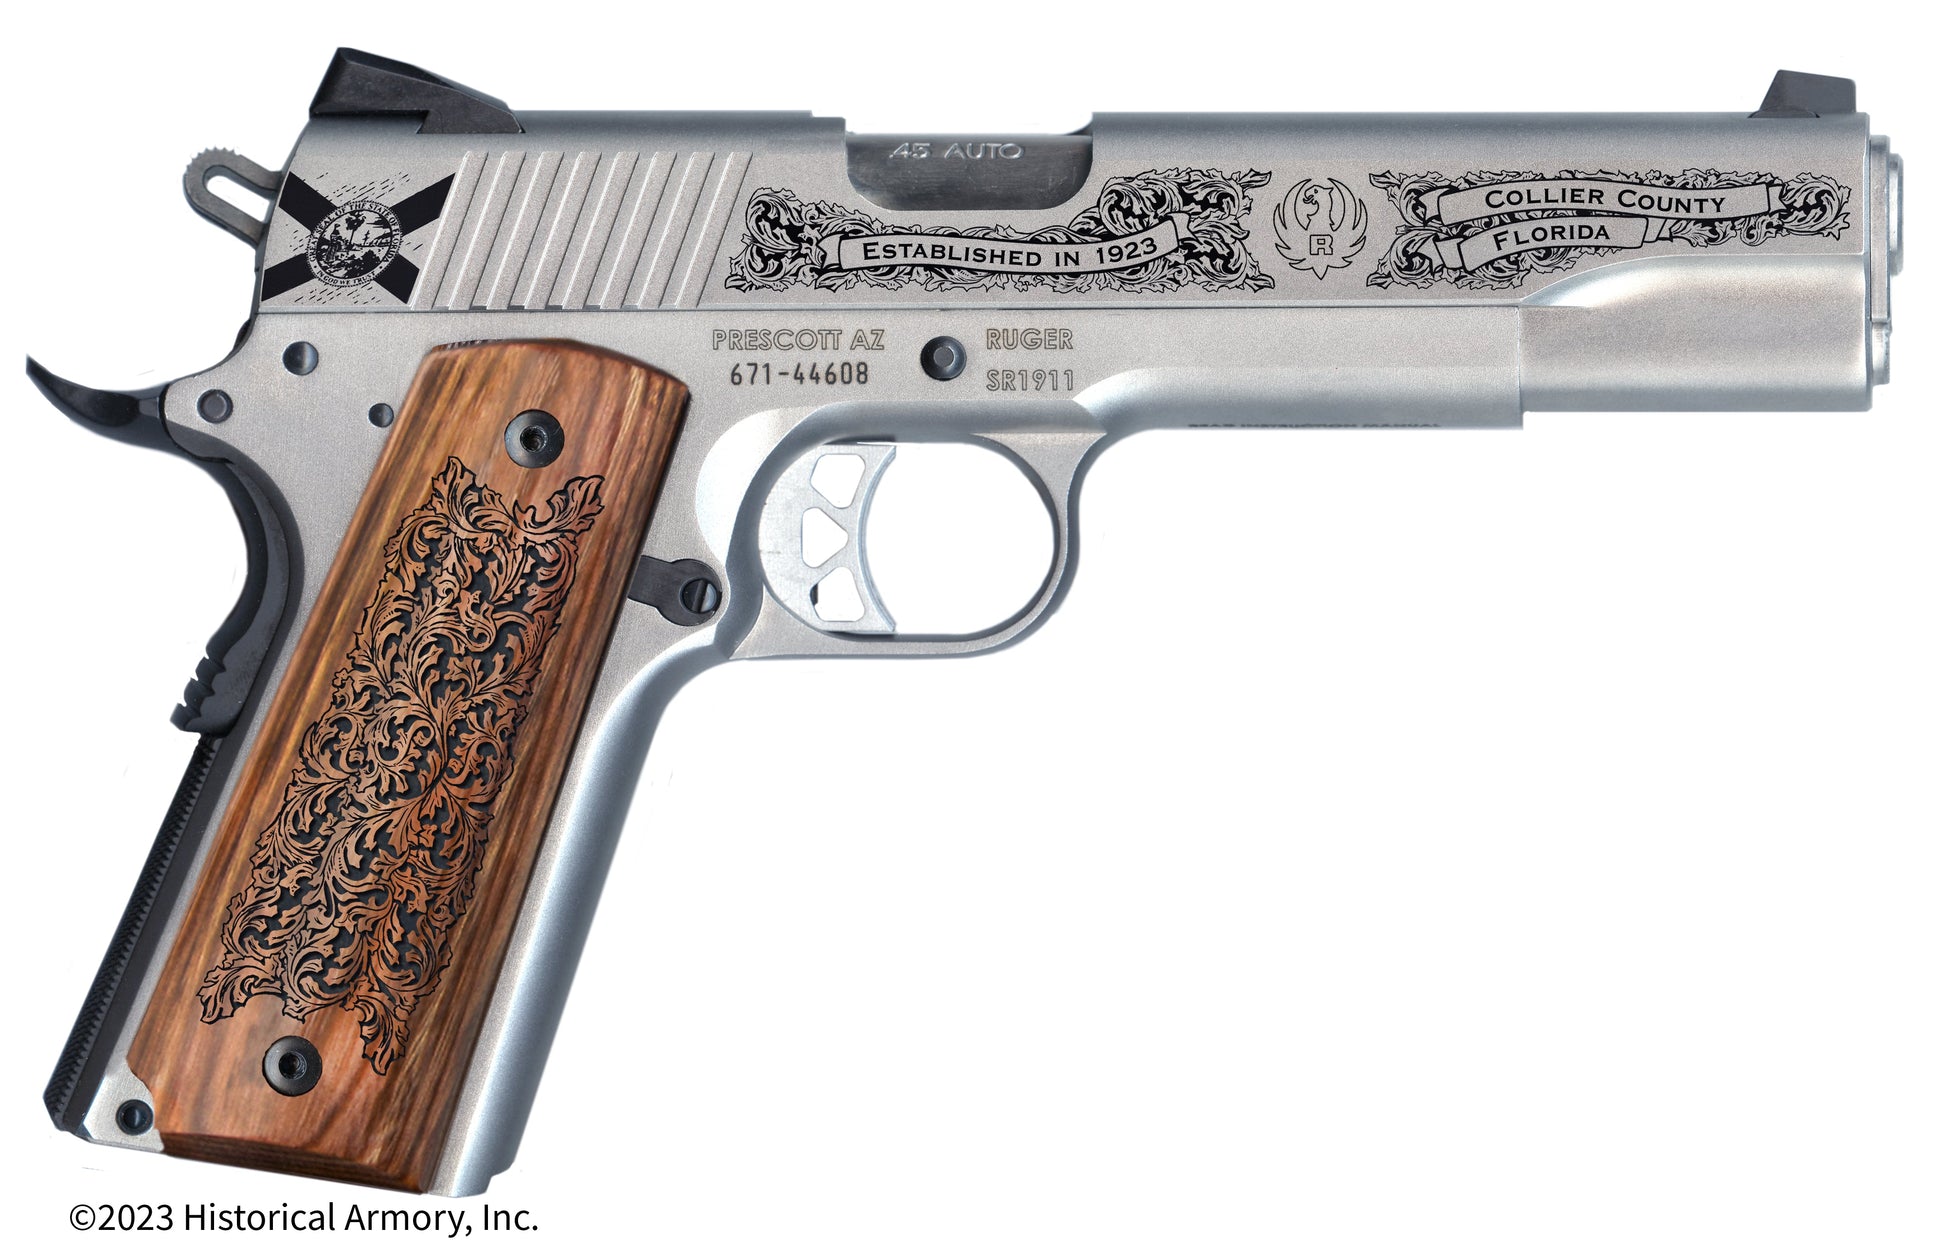 Collier County Florida Engraved .45 Auto Ruger 1911